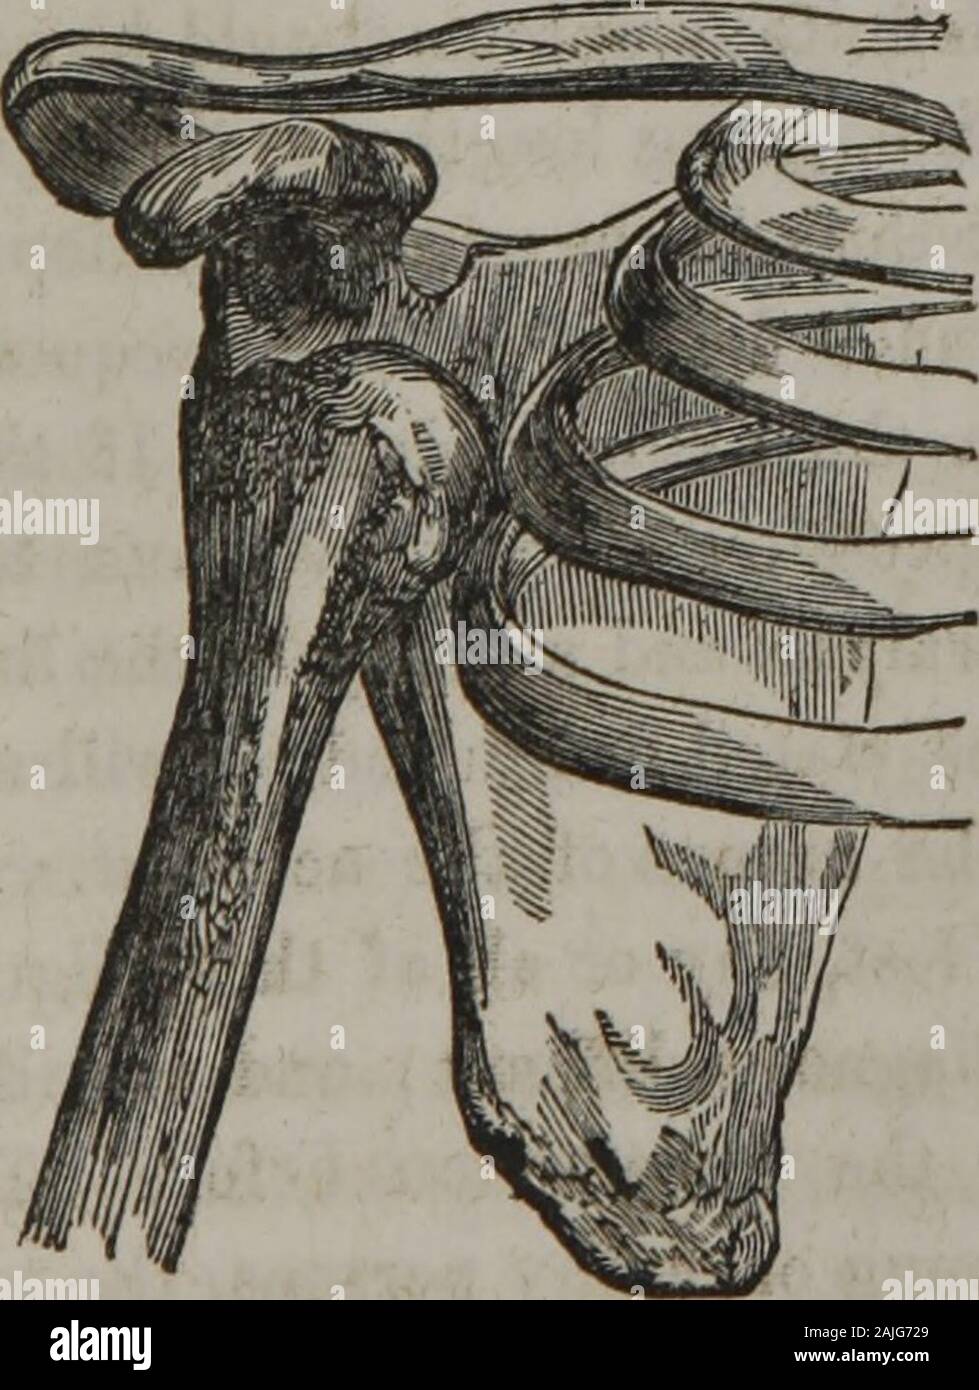 The homeopathic practice of surgery : together with operative surgery . ity, may be pushed or pulled downwards, forwards, or backwards:— In the first variety, the head of the bone is found in the axilla,or resting under the lower side of the inferior costa of the scap-ula. In the second, it is thrown forward upon the pectoral mus-cles, below the middle of the clavicle, between the coracoid pro-cess and the sternum. In the third case, the head is thrown upto the higher and back part of the inferior costa, or dorsum of thescapula, where the large protuberance can be distinctly felt andseen. The Stock Photo